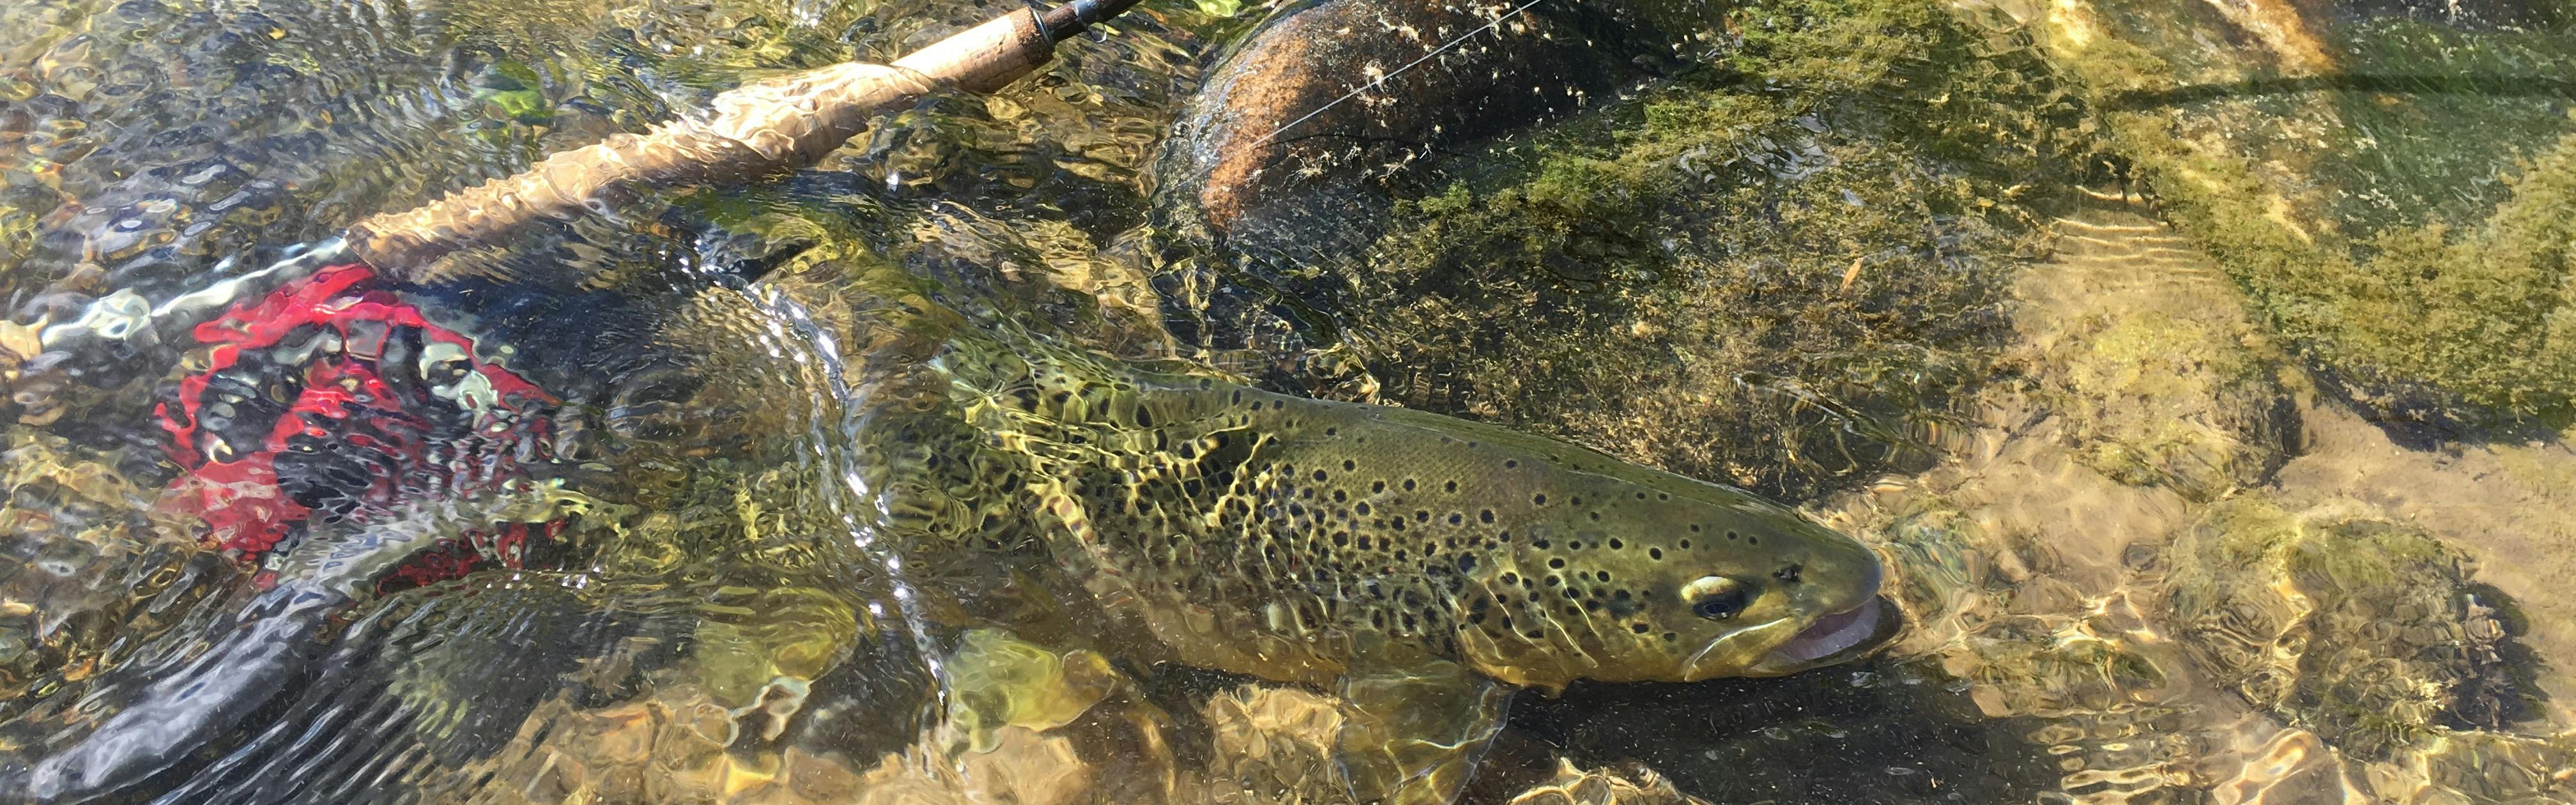 Fish in stream next to a fishing rod